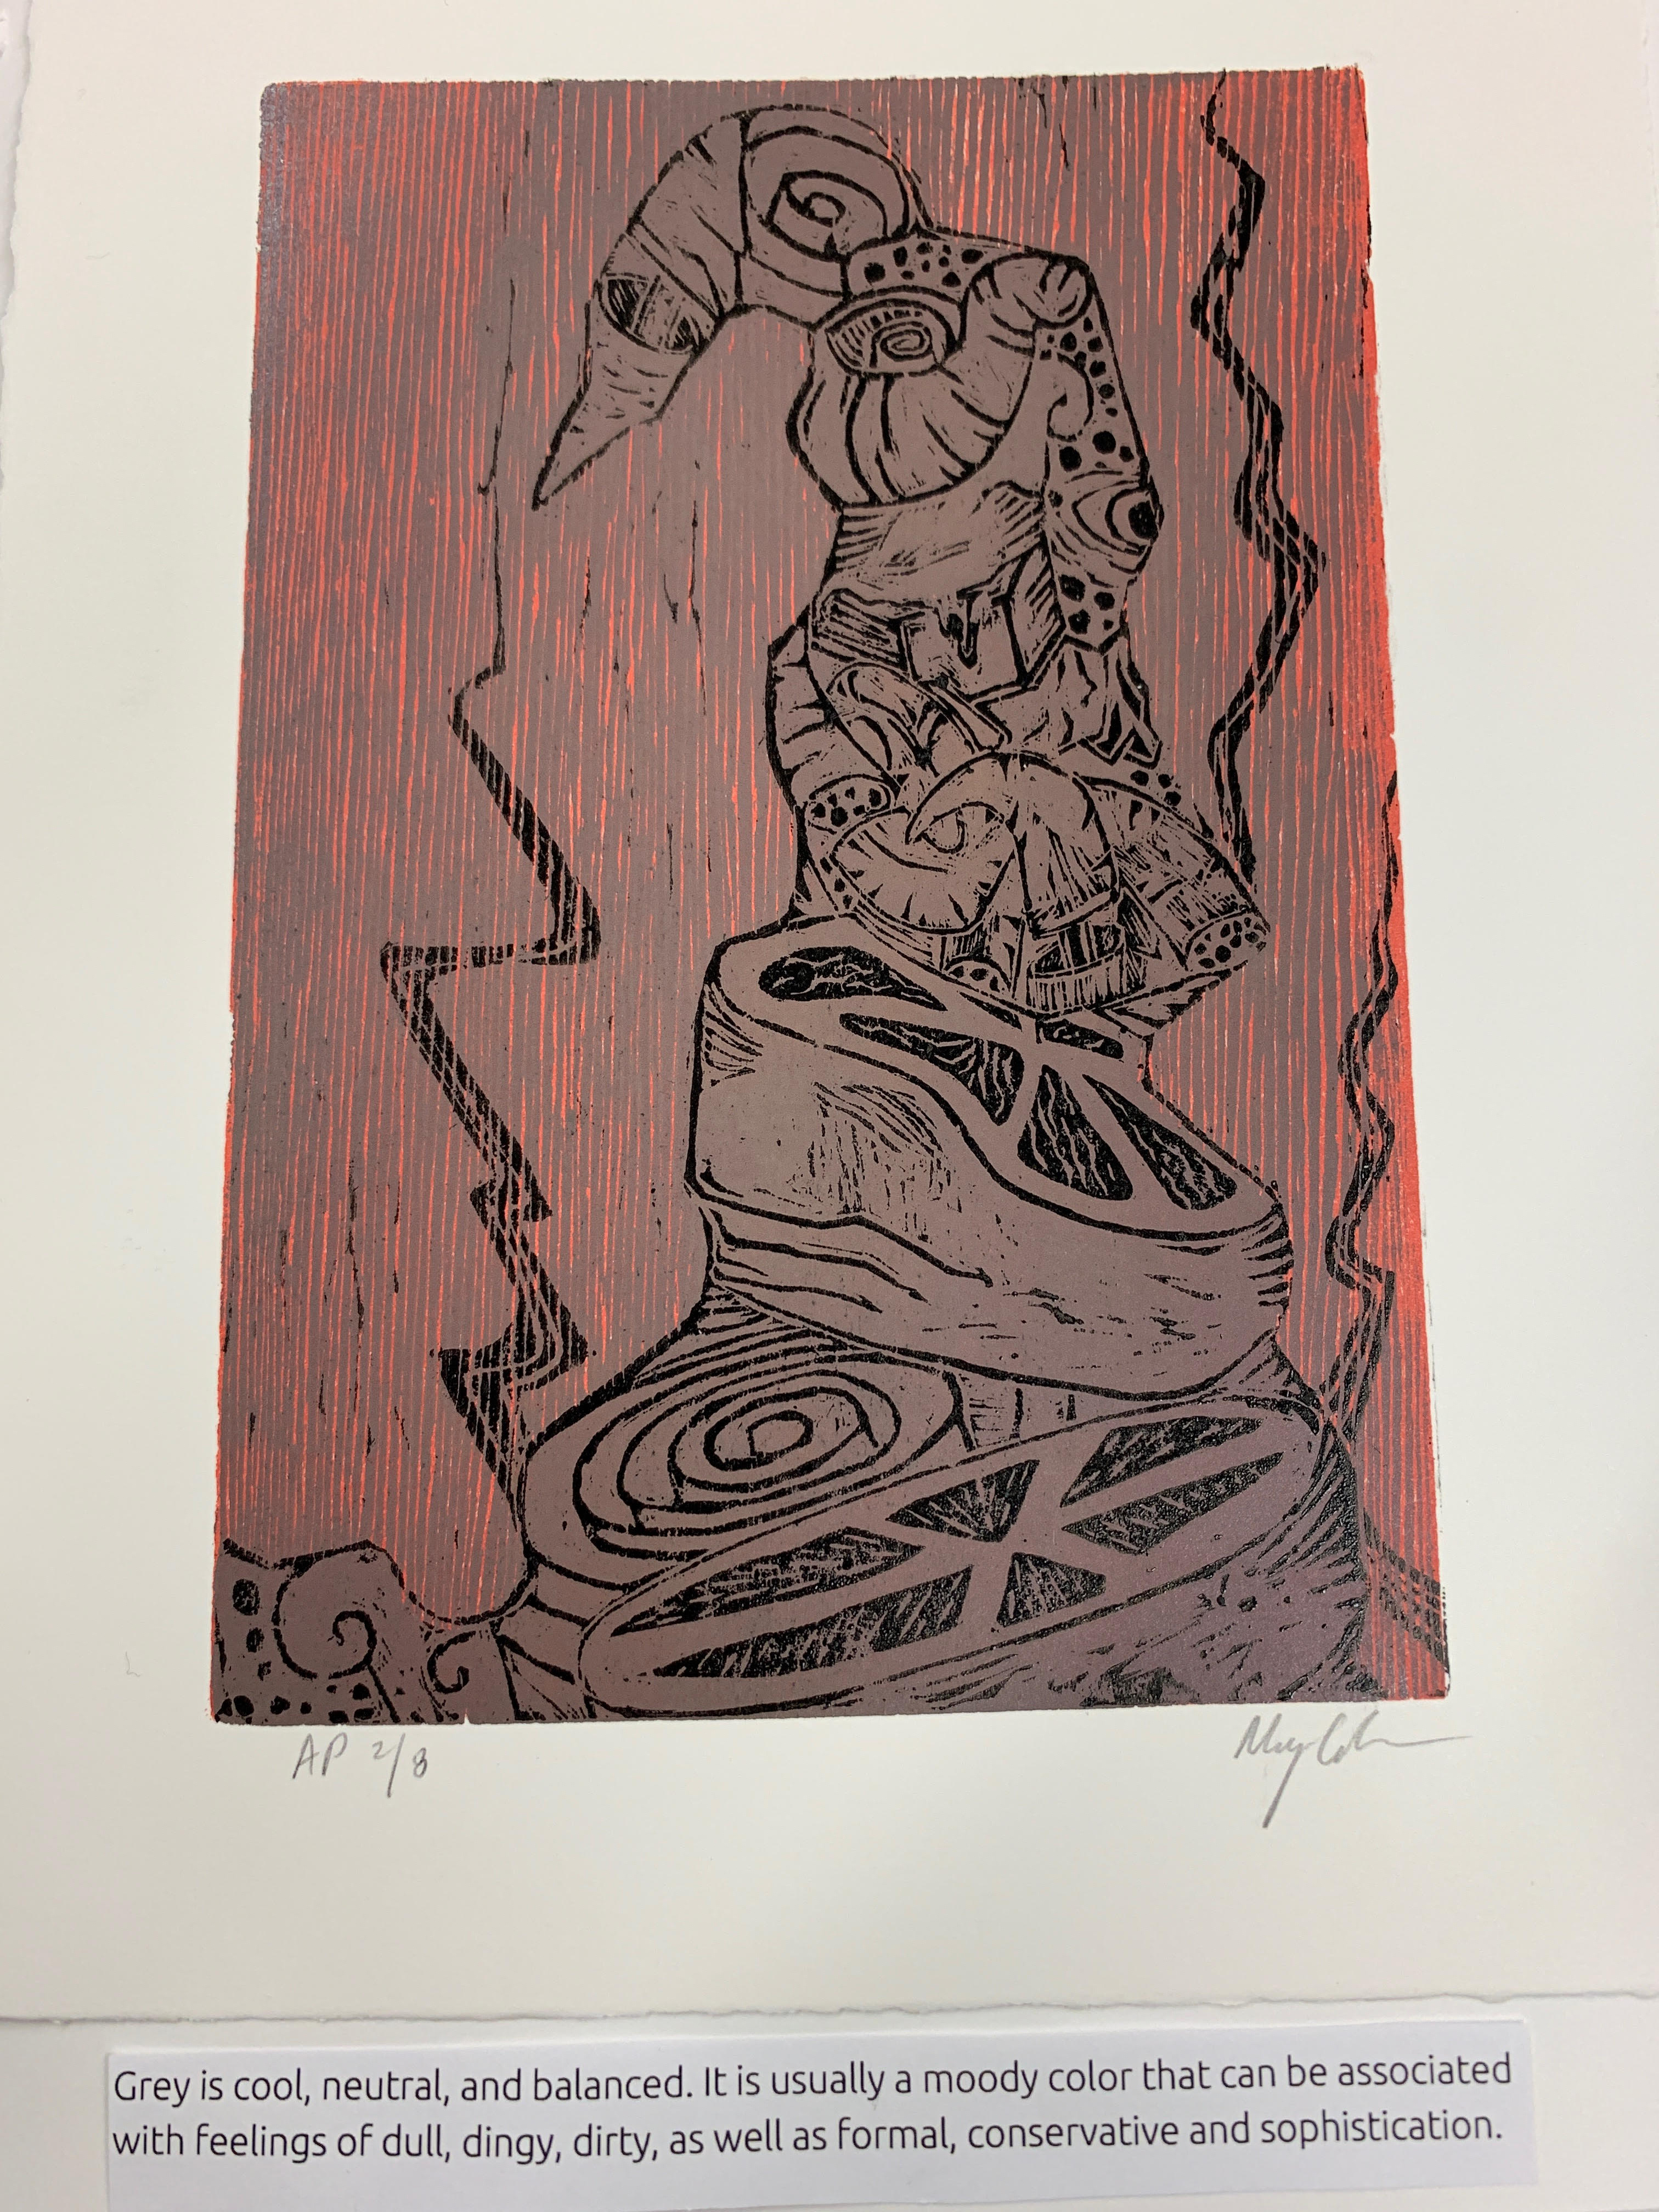 Page 9. Caption: The abstract print is predominantly grey, with a red background. Grey is cool, neutral, and balanced. It is usually a moody color that can be associated with feelings of dullness, dinginess, dirtiness, as well as formality, being conservative and/ or sophistication.